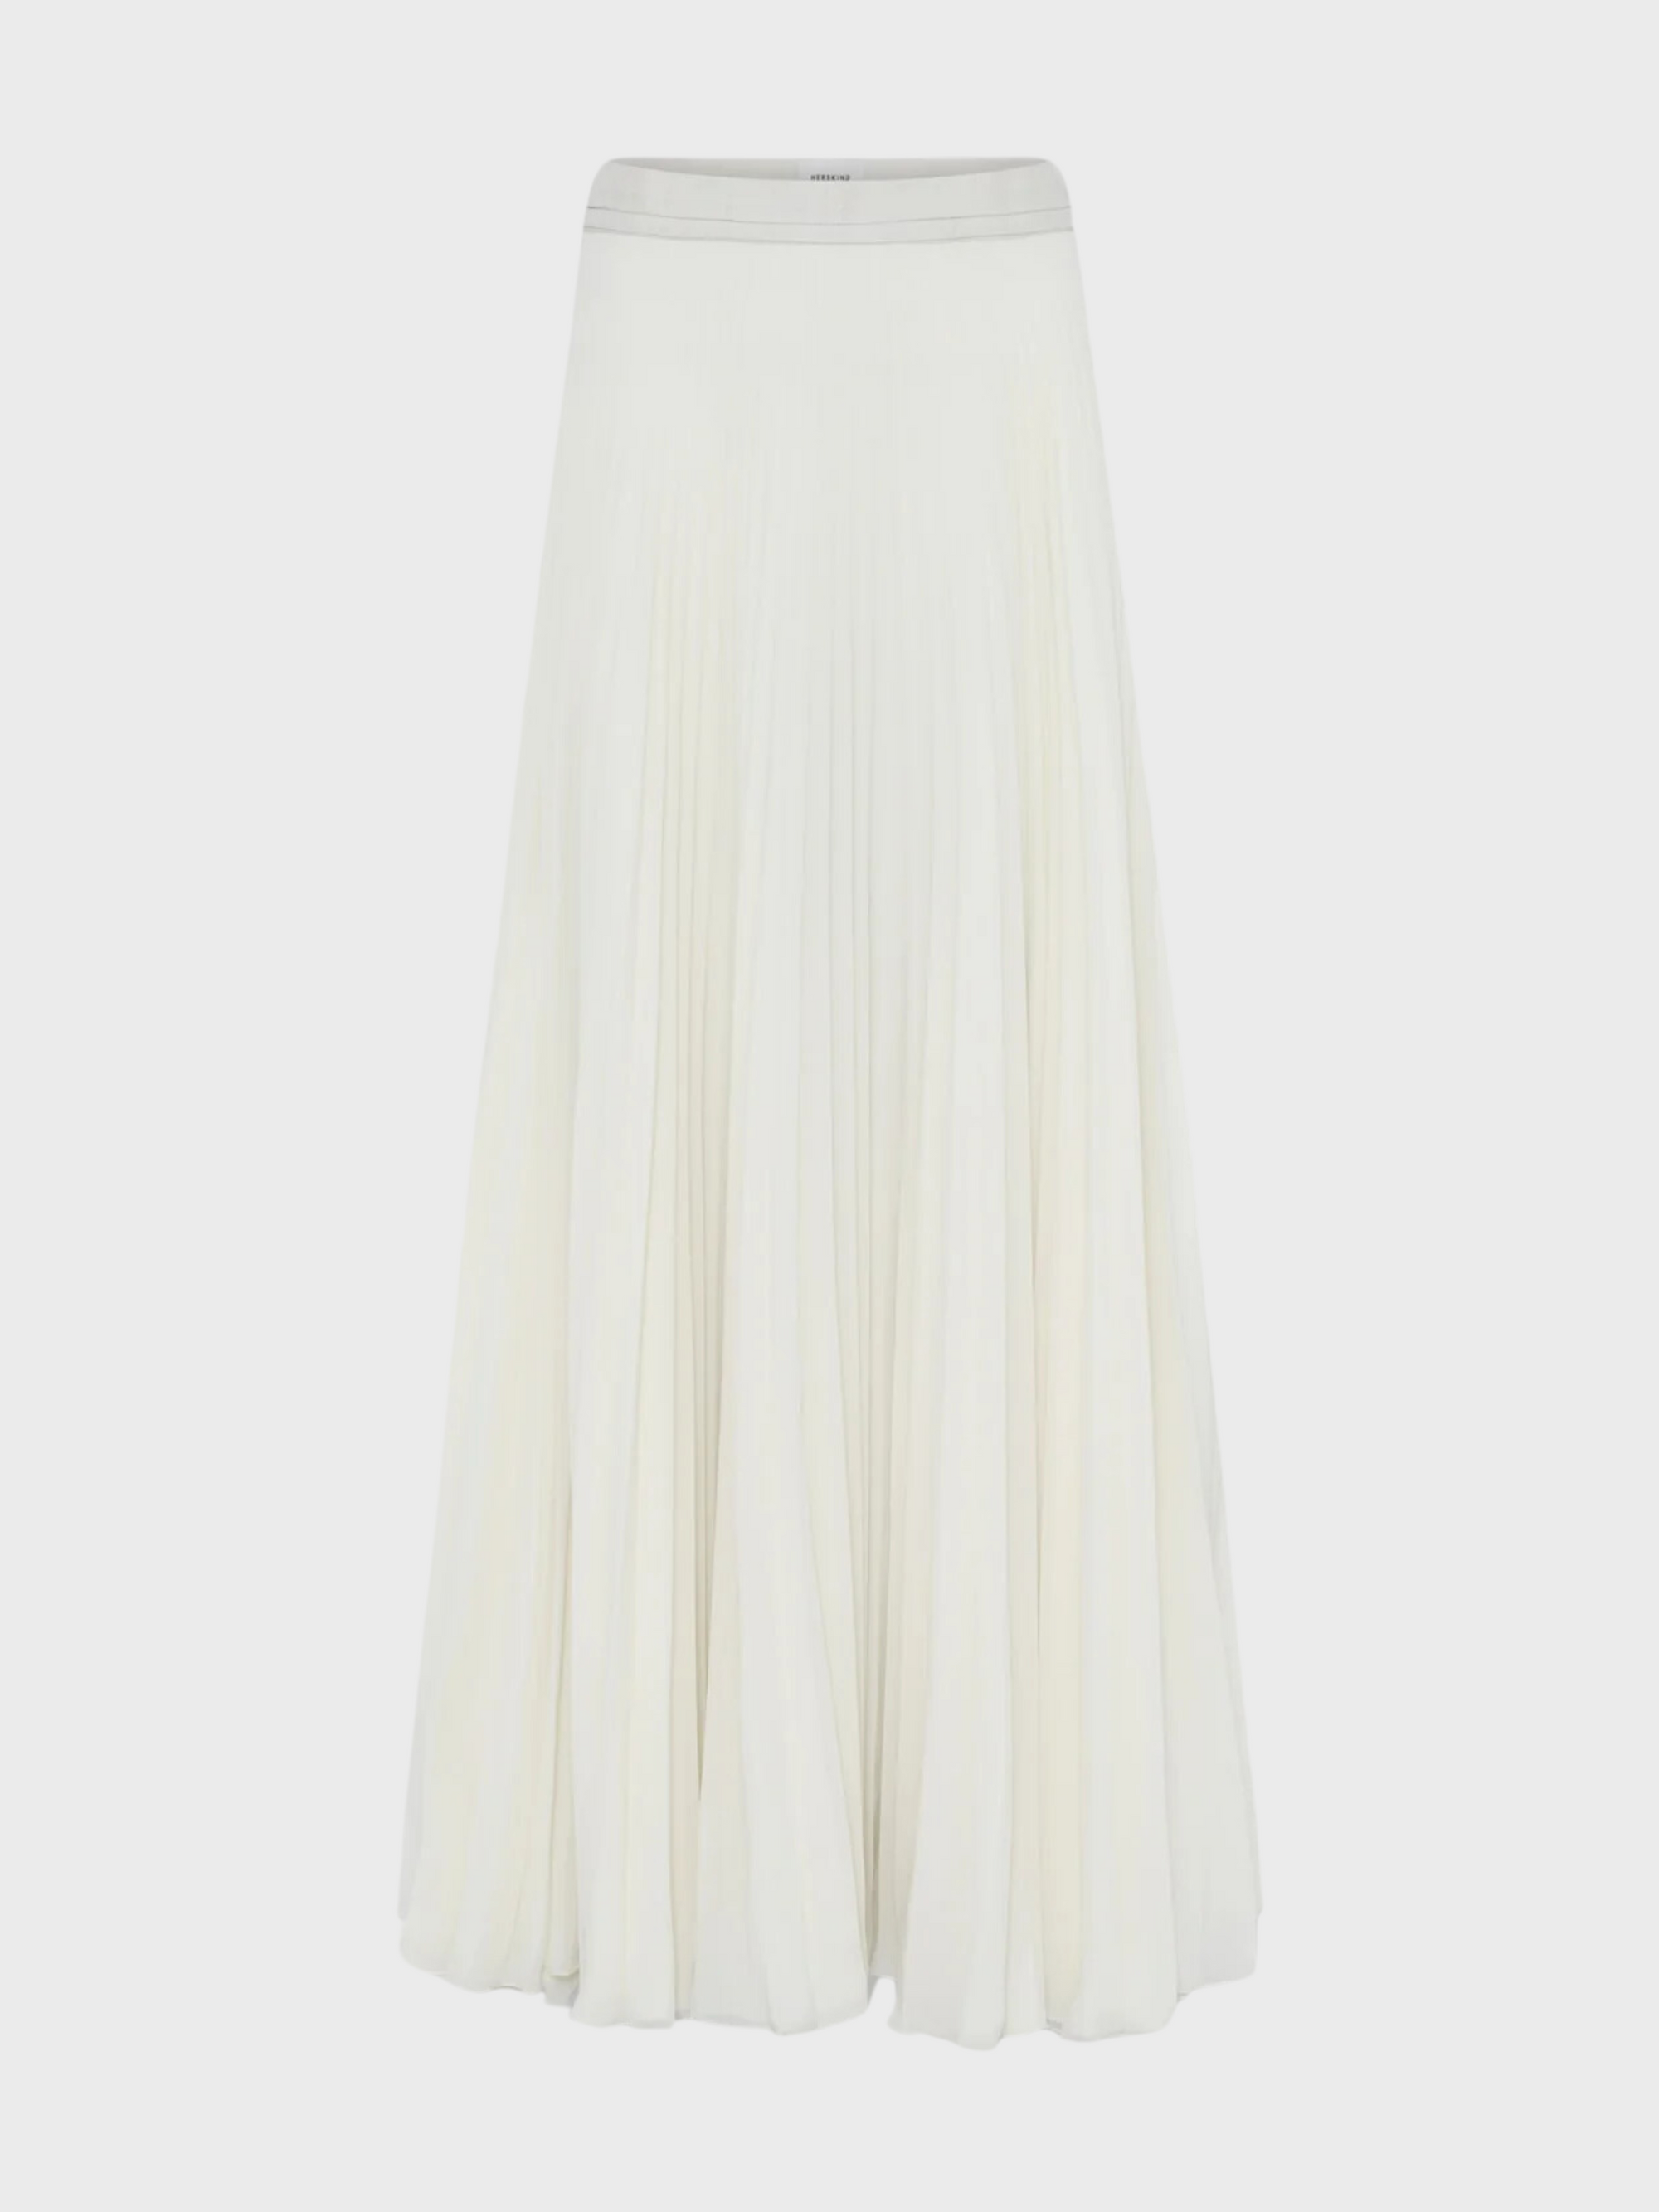 Herskind Nessa Skirt Medium White-Dresses-32-West of Woodward Boutique-Vancouver-Canada